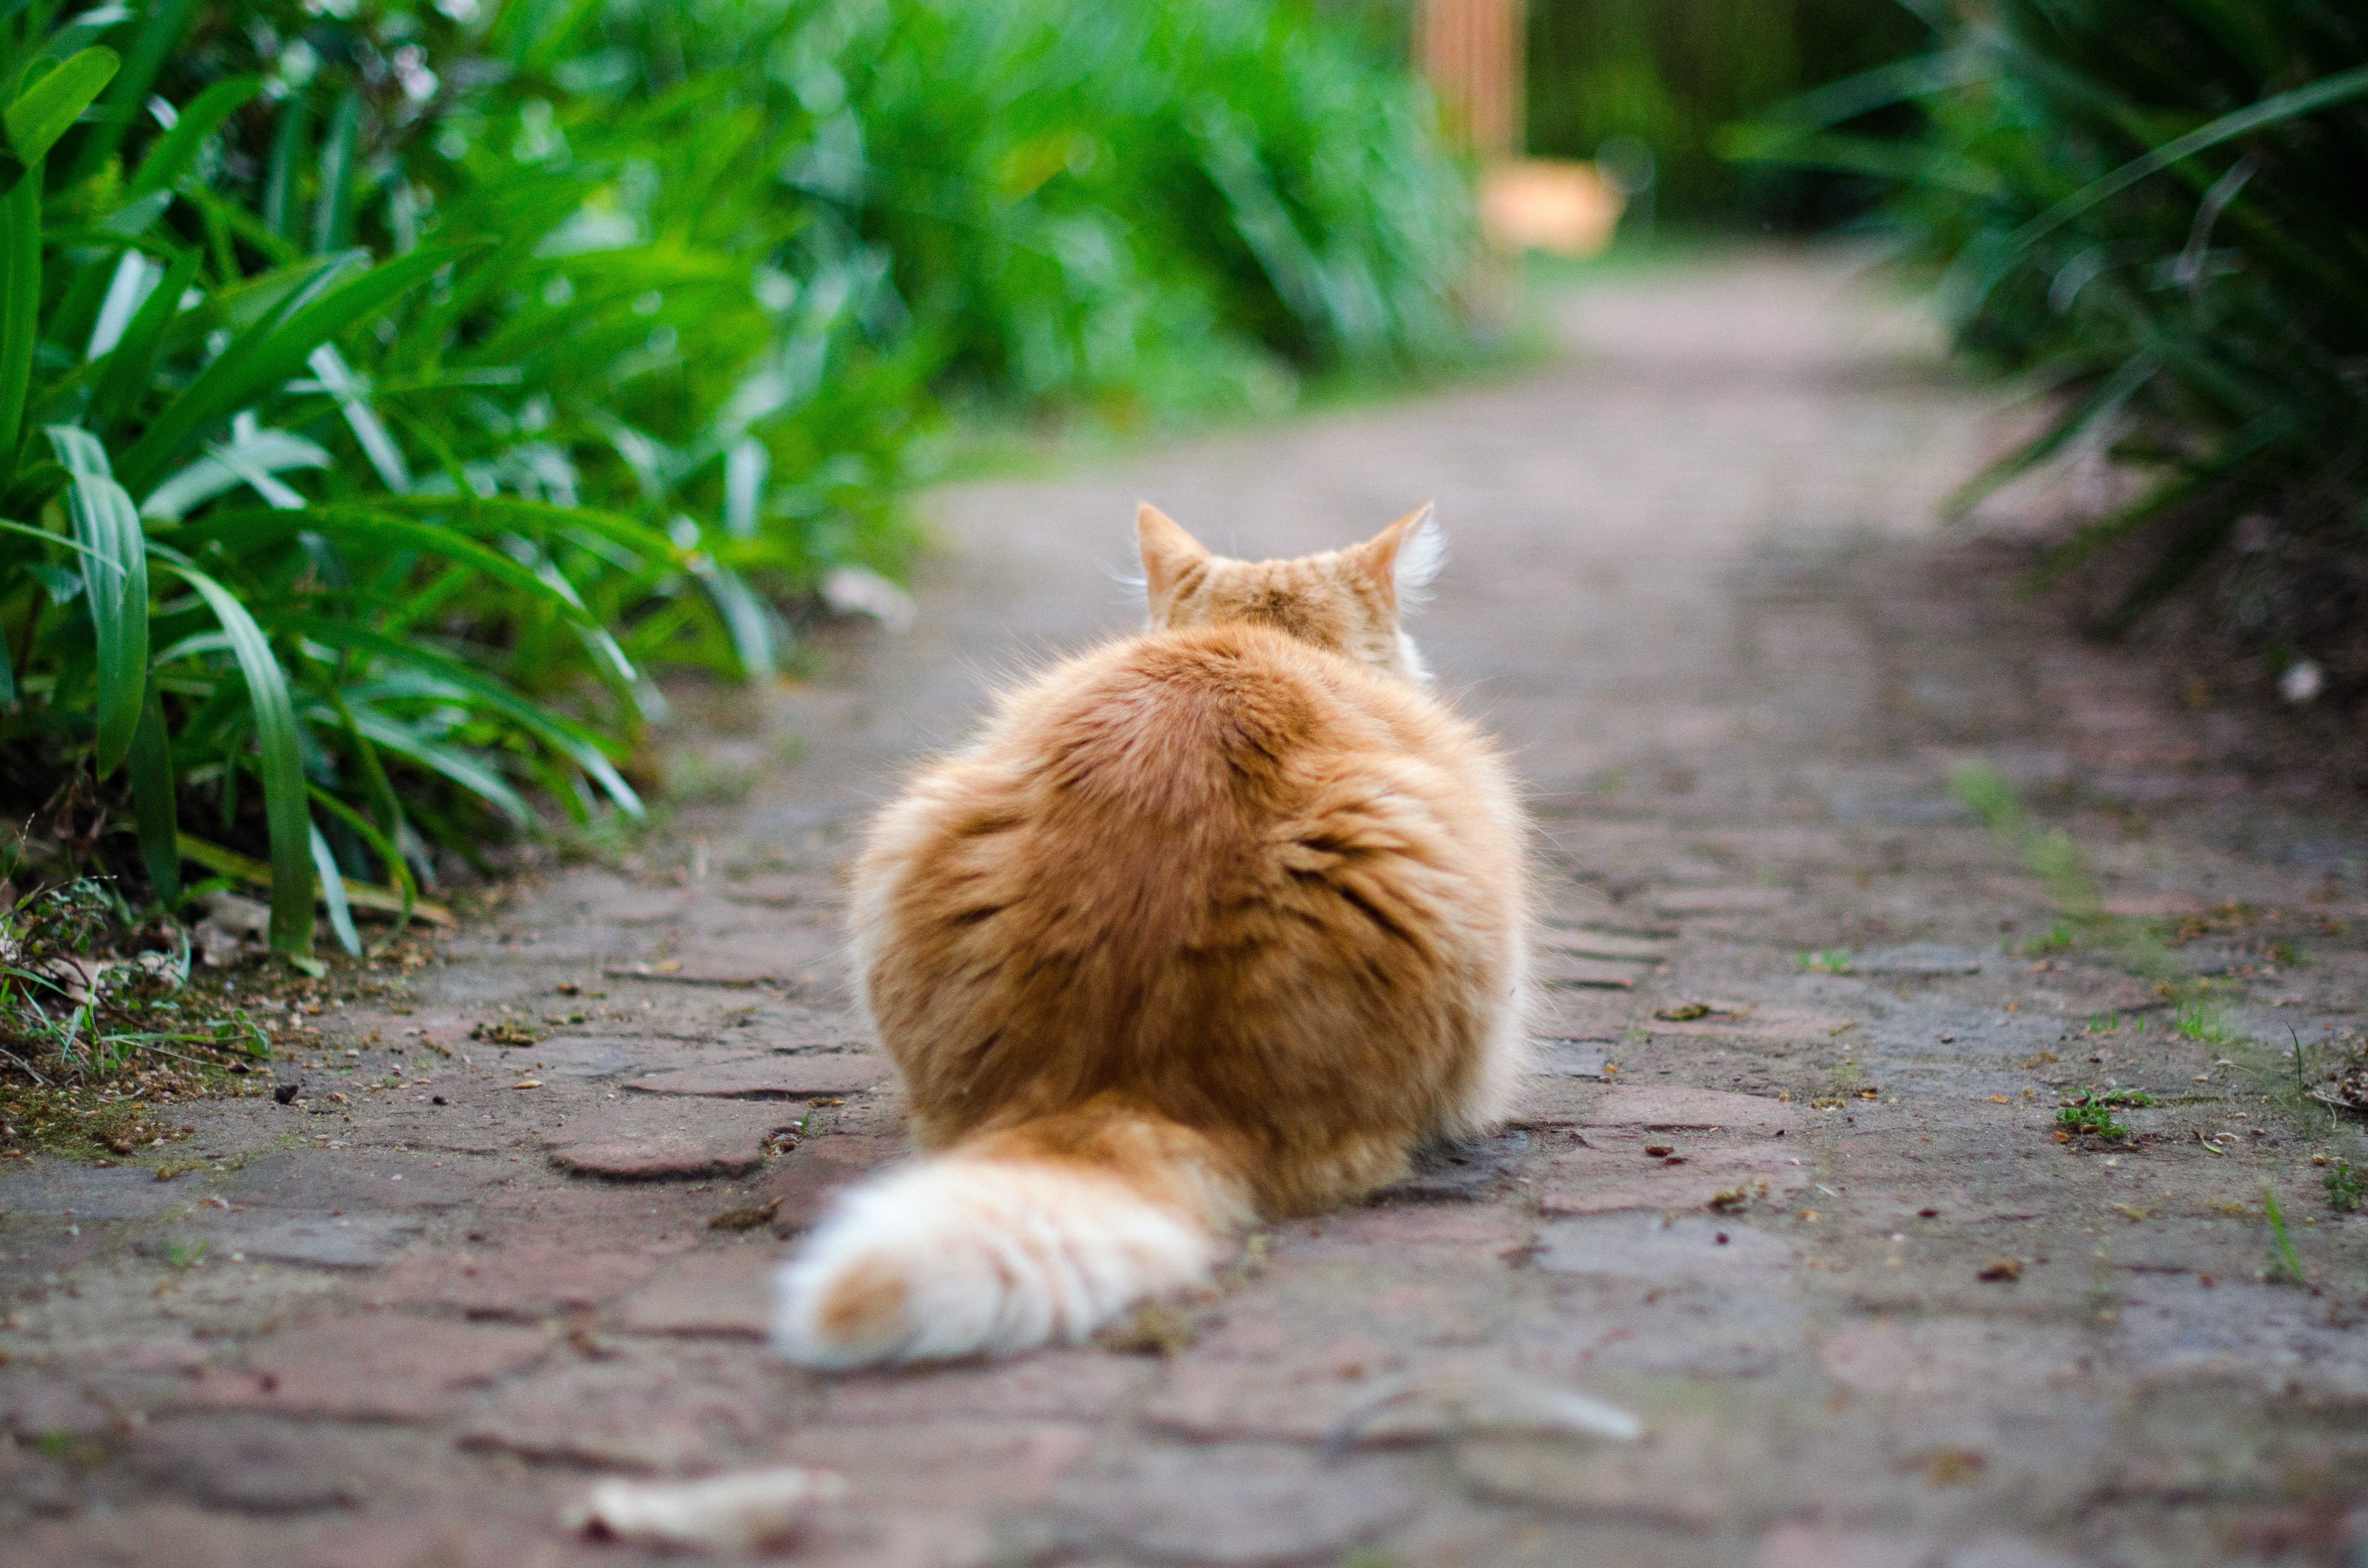 A cat sits on a brick path surrounded by tall grass 